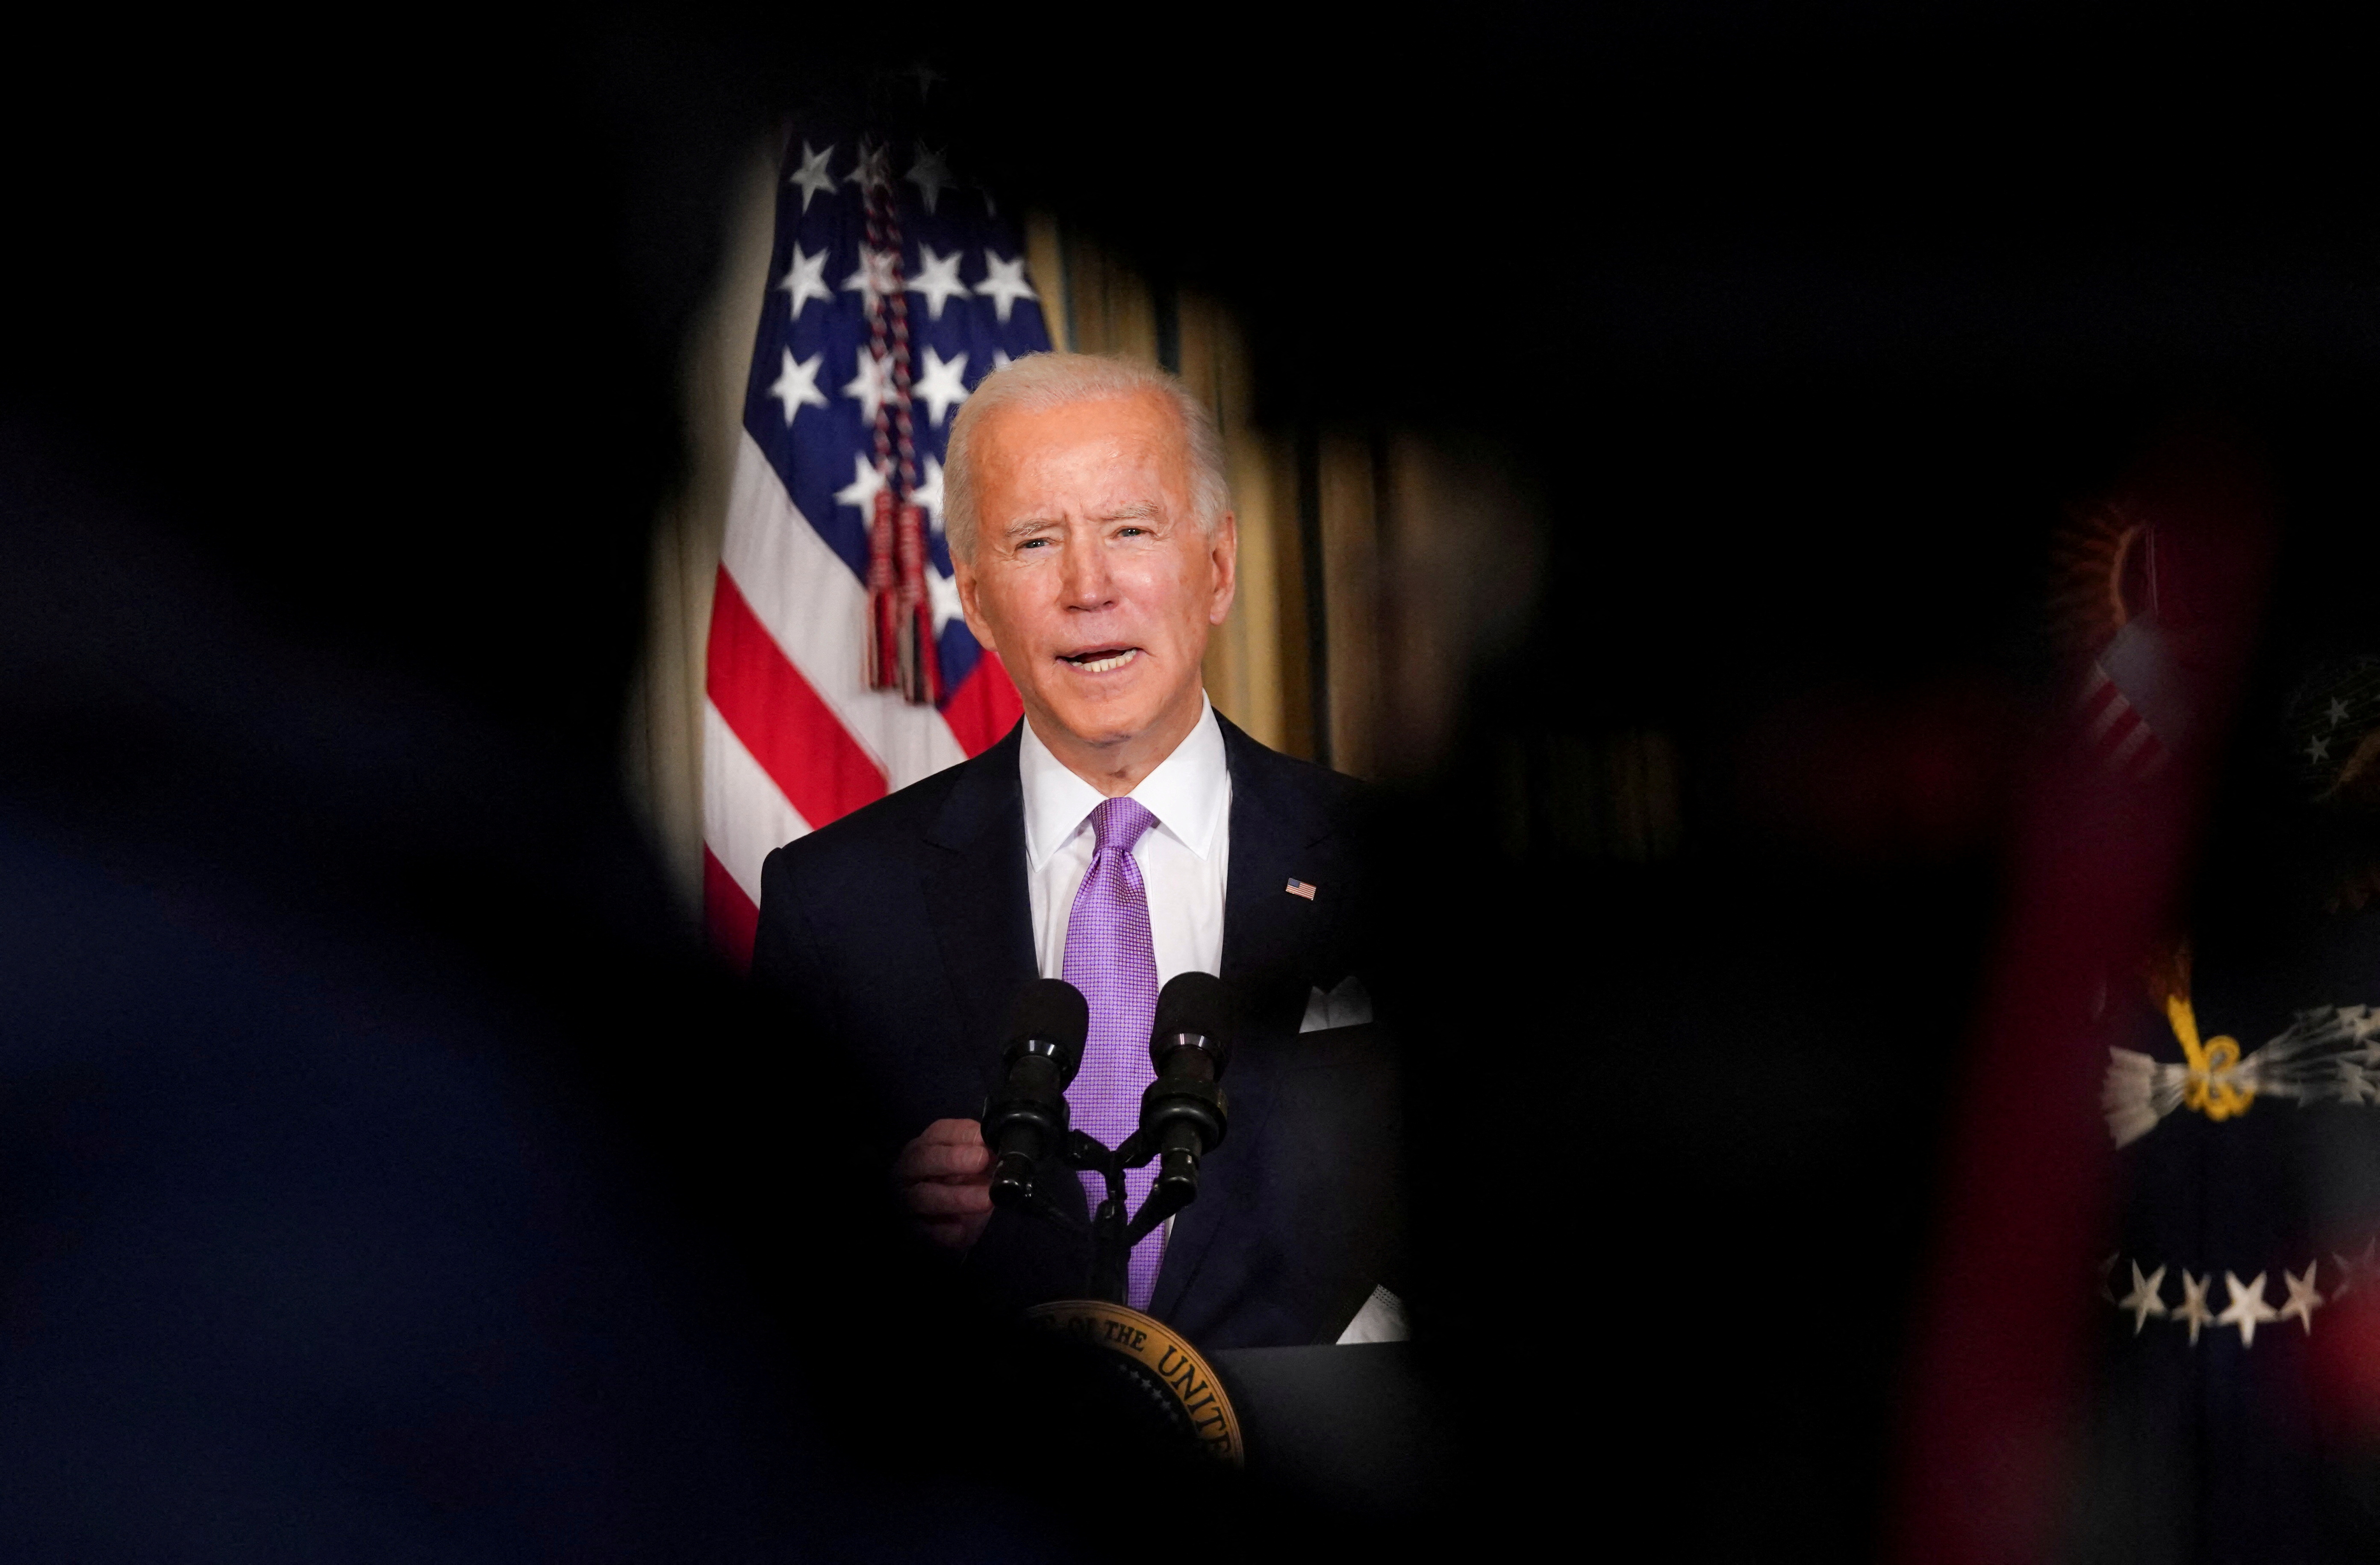 Biden speaks about racial equity at the White House in Washington